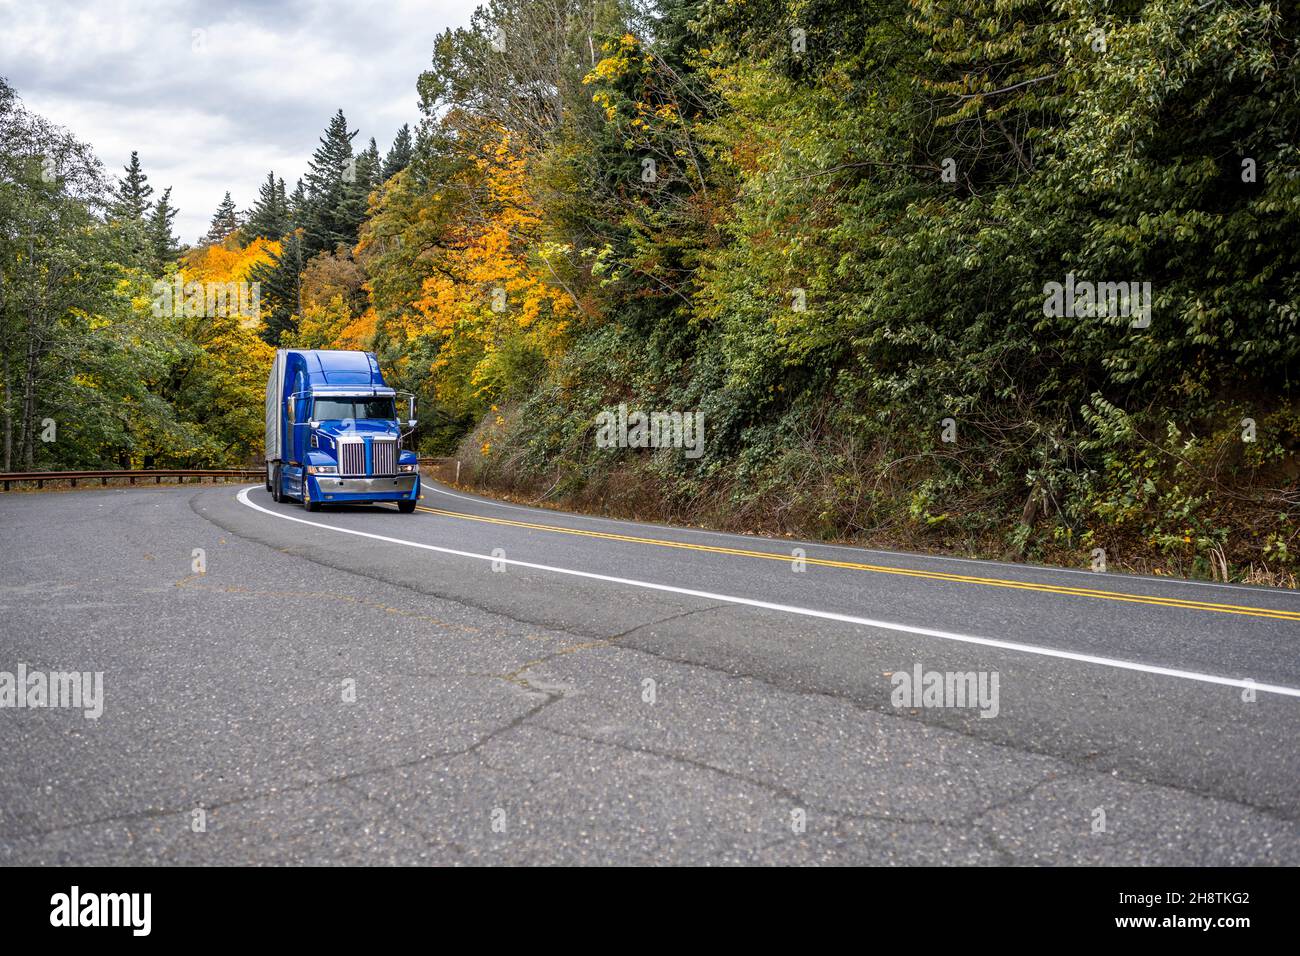 Industrial big rig blue semi truck tractor transporting commercial cargo in refrigerator semi trailer driving on the divided winding highway road with Stock Photo